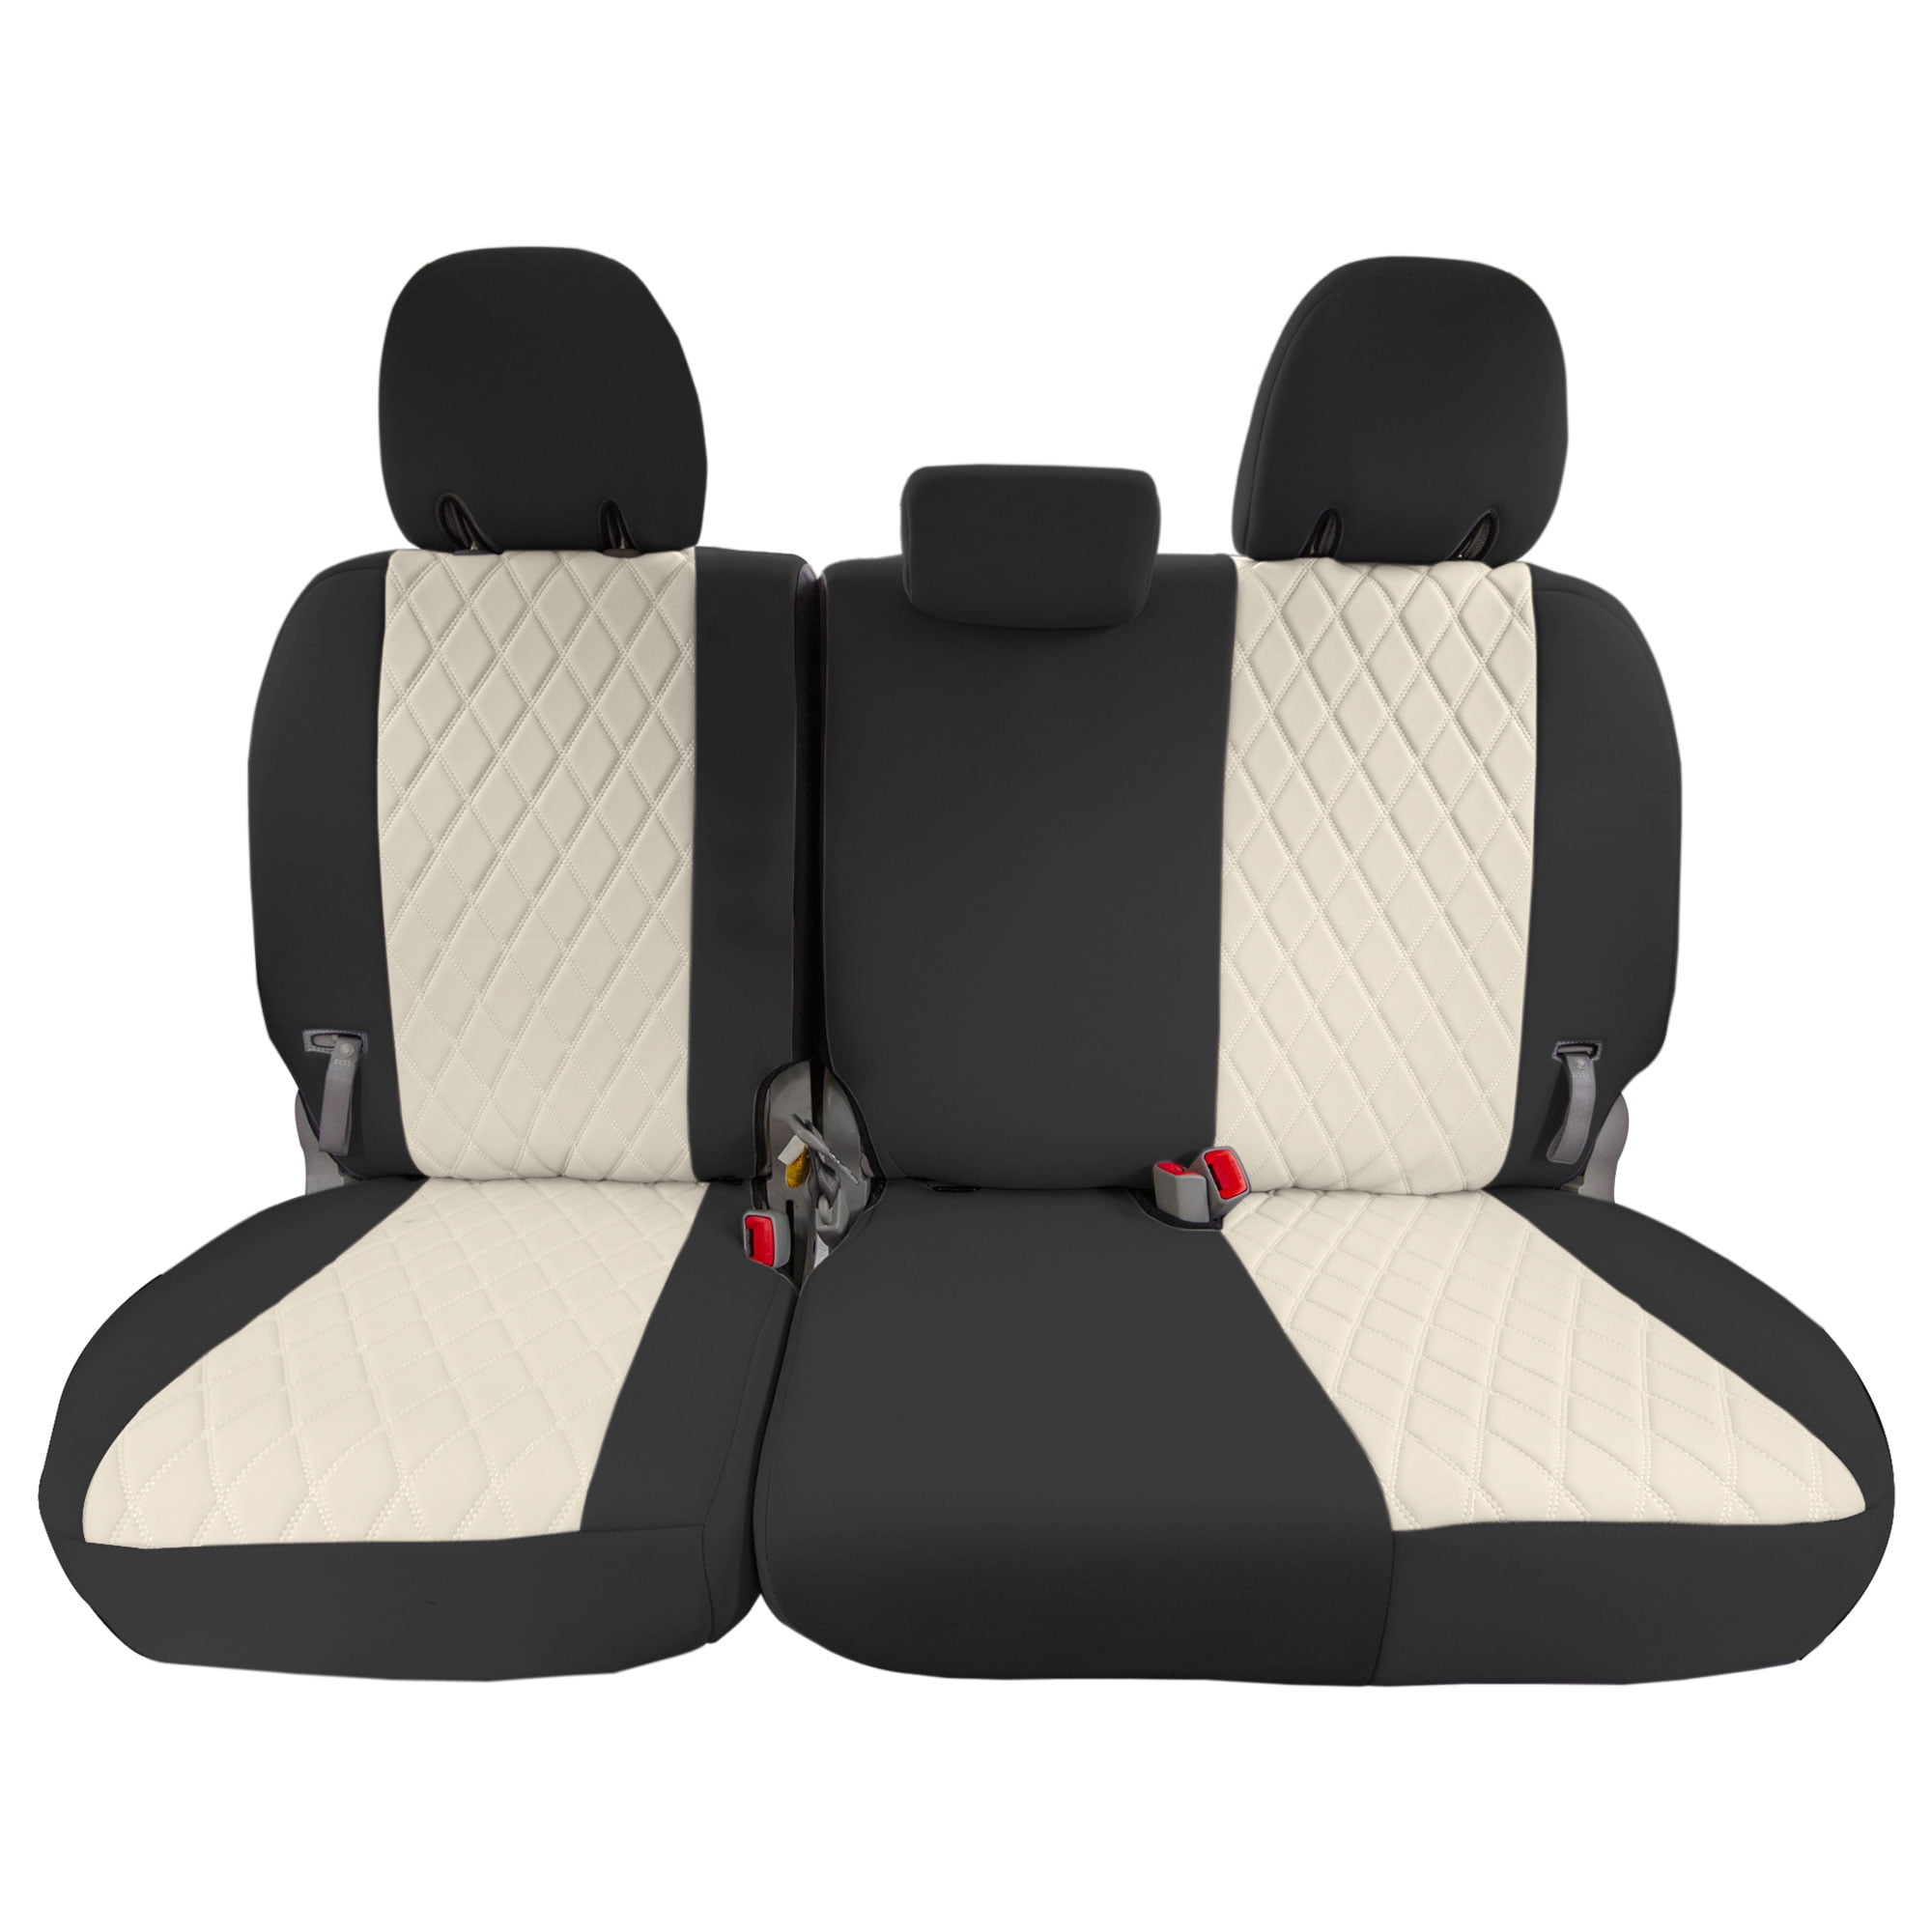 Beige Covers Fit Custom Neoprene, Seat 2011-2020, Covers Waterproof Car Set, Seat Seat in Middle Toyota and Cover Washable Seat Sienna Covers Group Automotive Car for FH